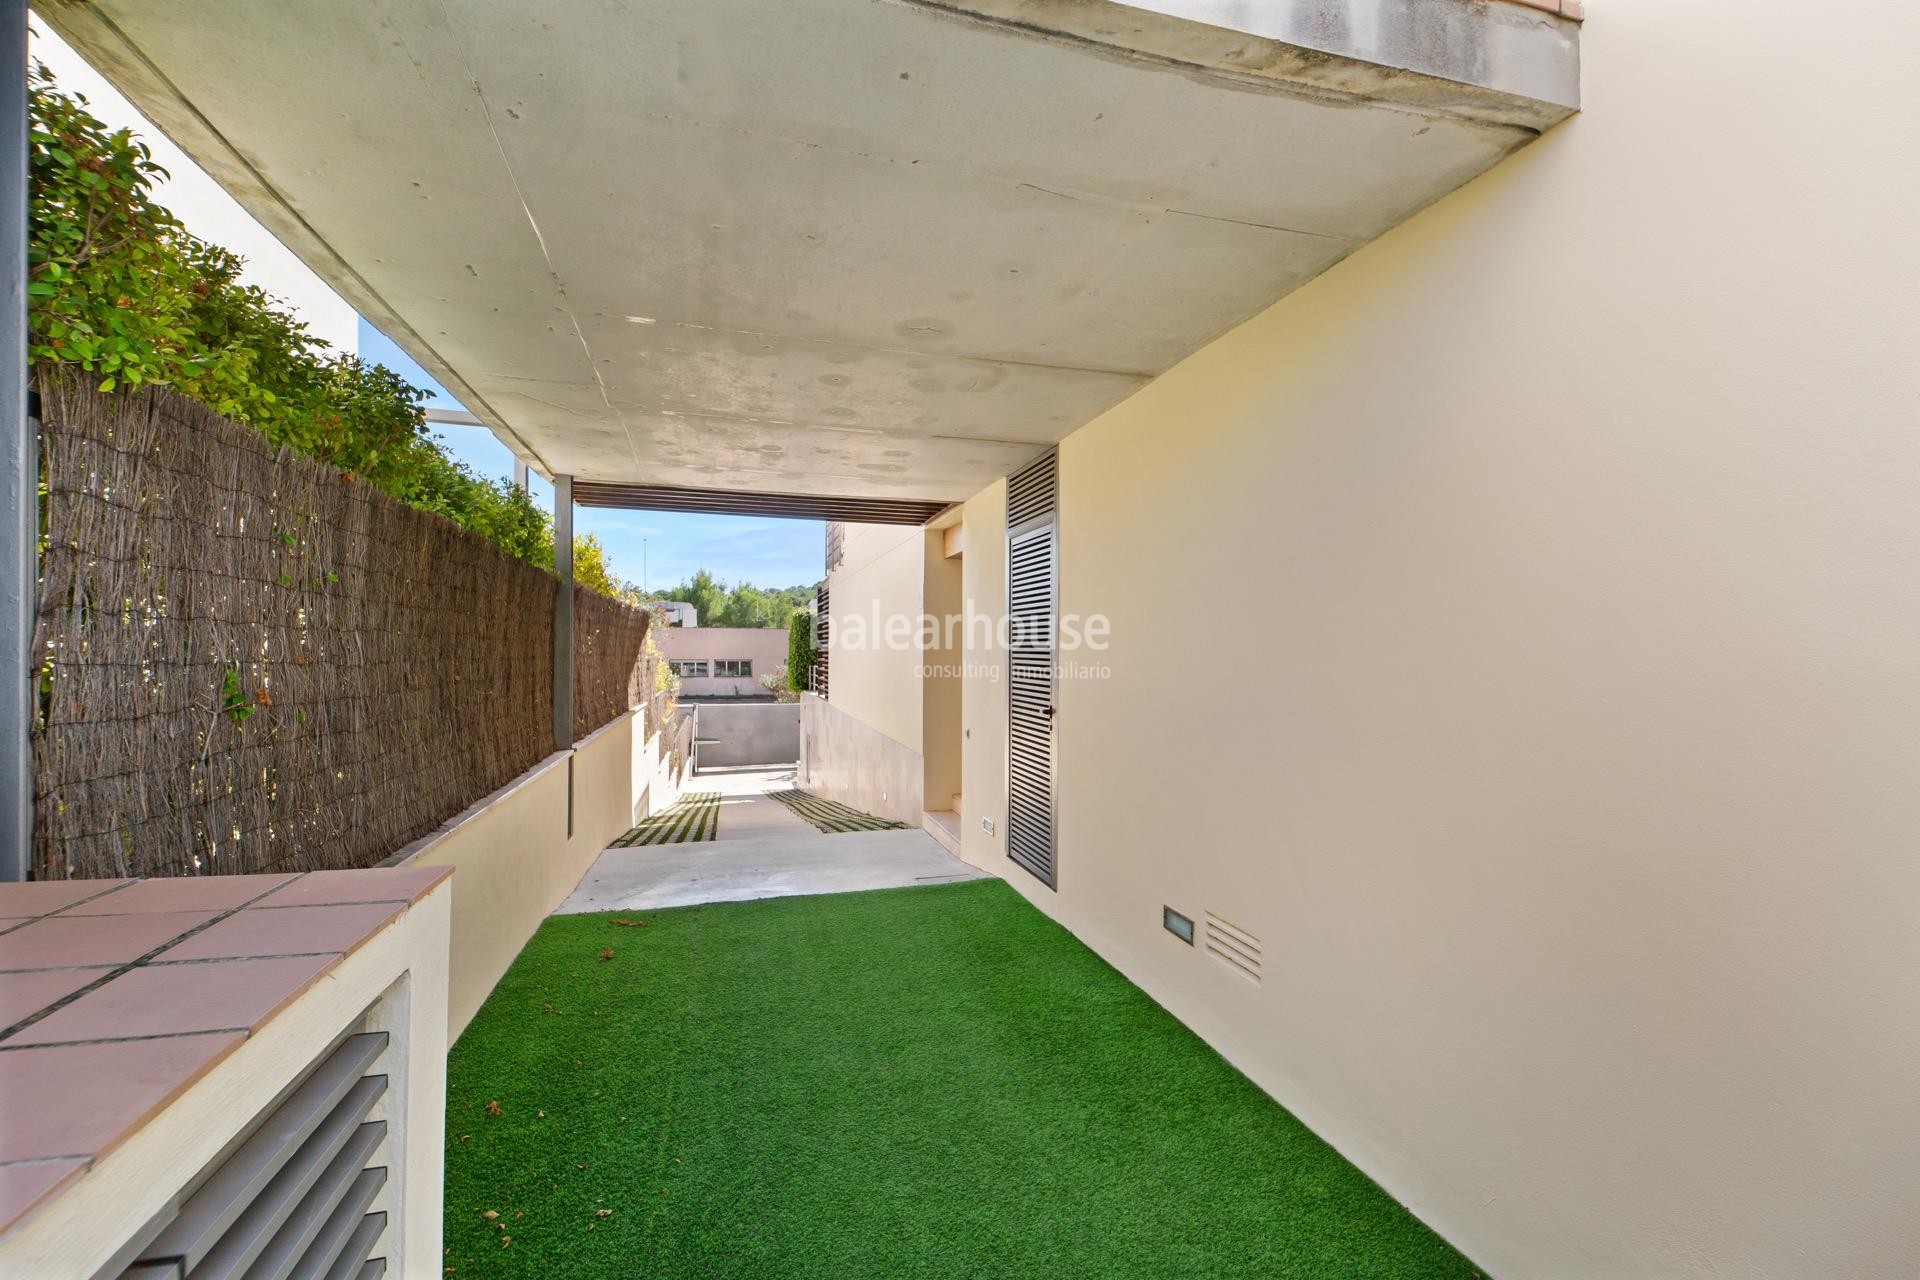 Excellent semi-detached house with modern interiors in the green surroundings of Sa Teulera